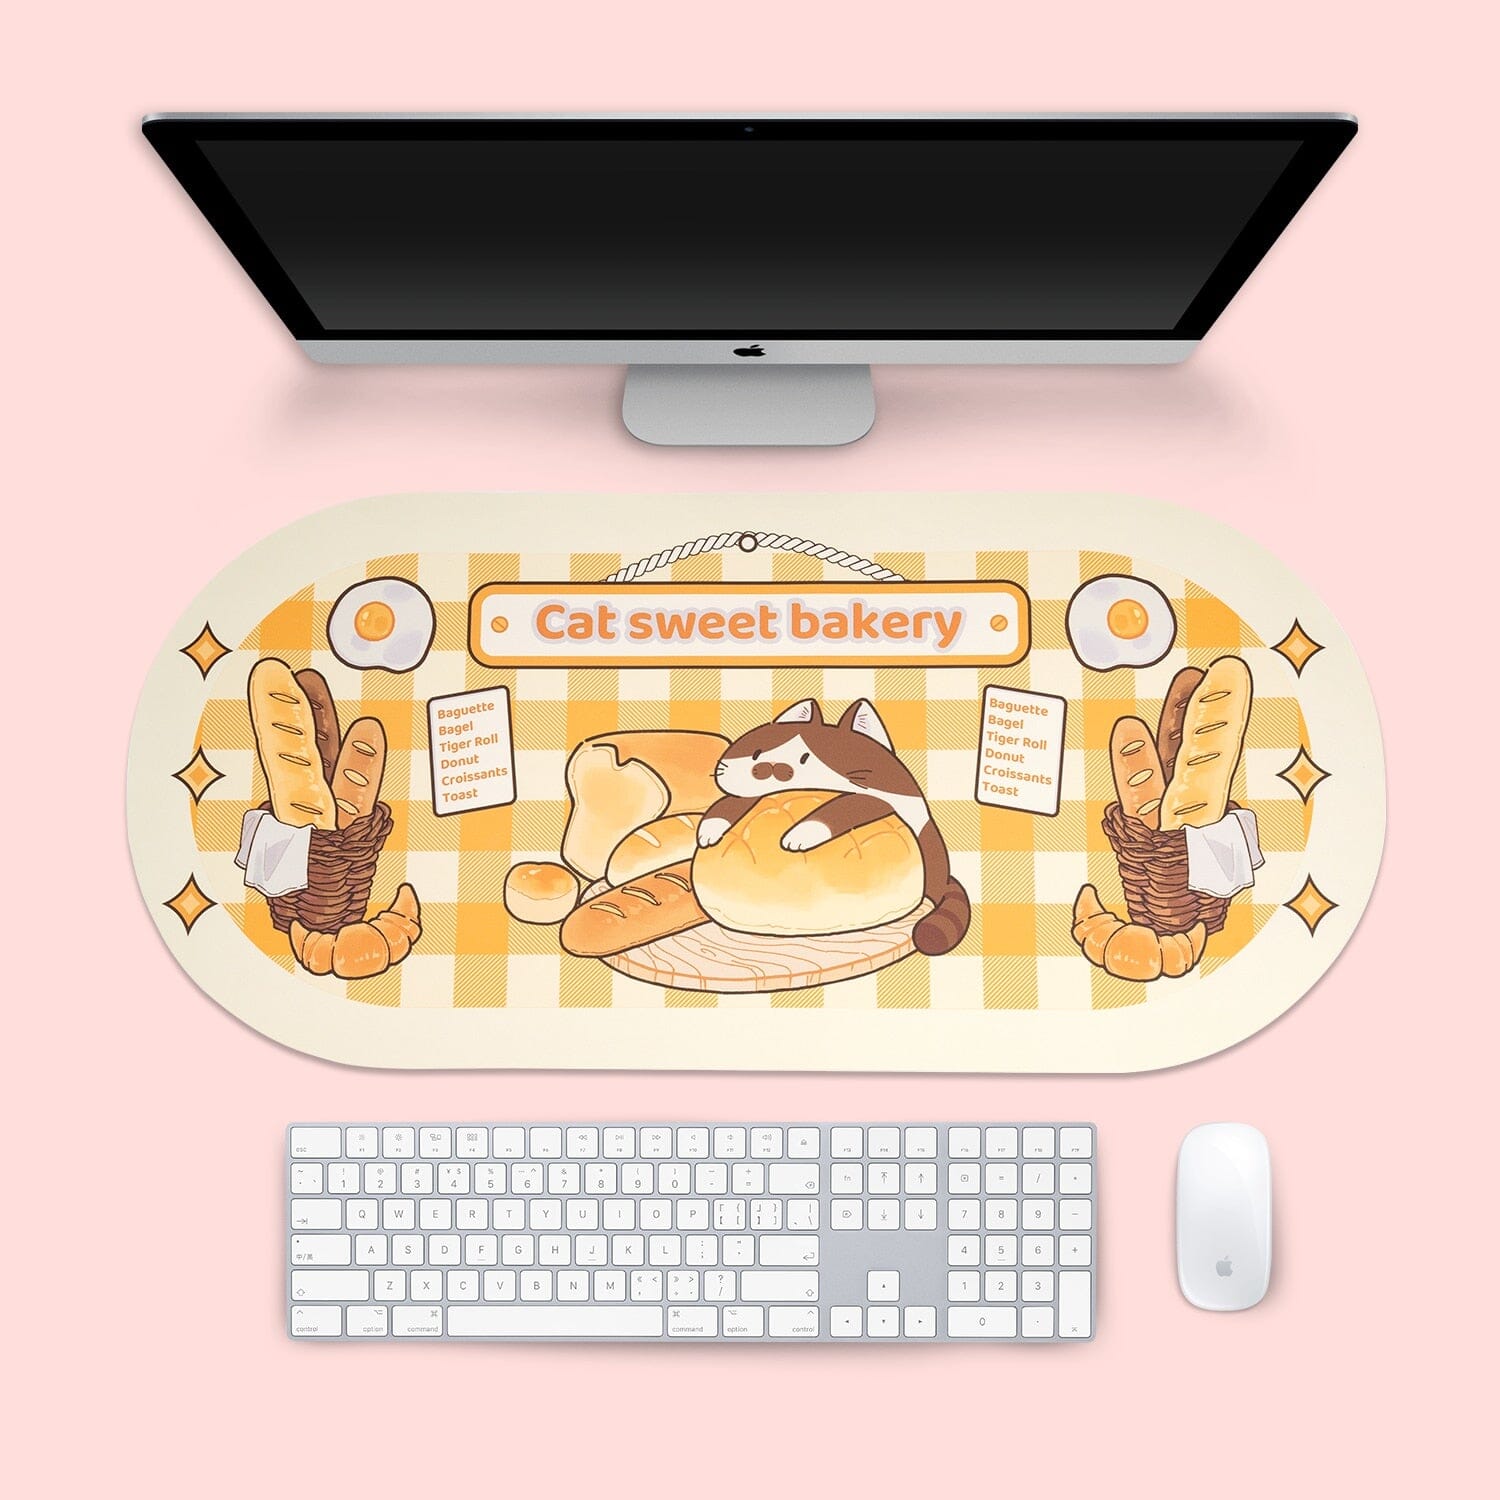 GeekShare Computer Mouse Pad Keyboard Wrist Rest Cat Bakery Super Cute Big Desk Mousepad Office Table Mat Gaming Accessories New 0 GatoGeek Big mouse pad 